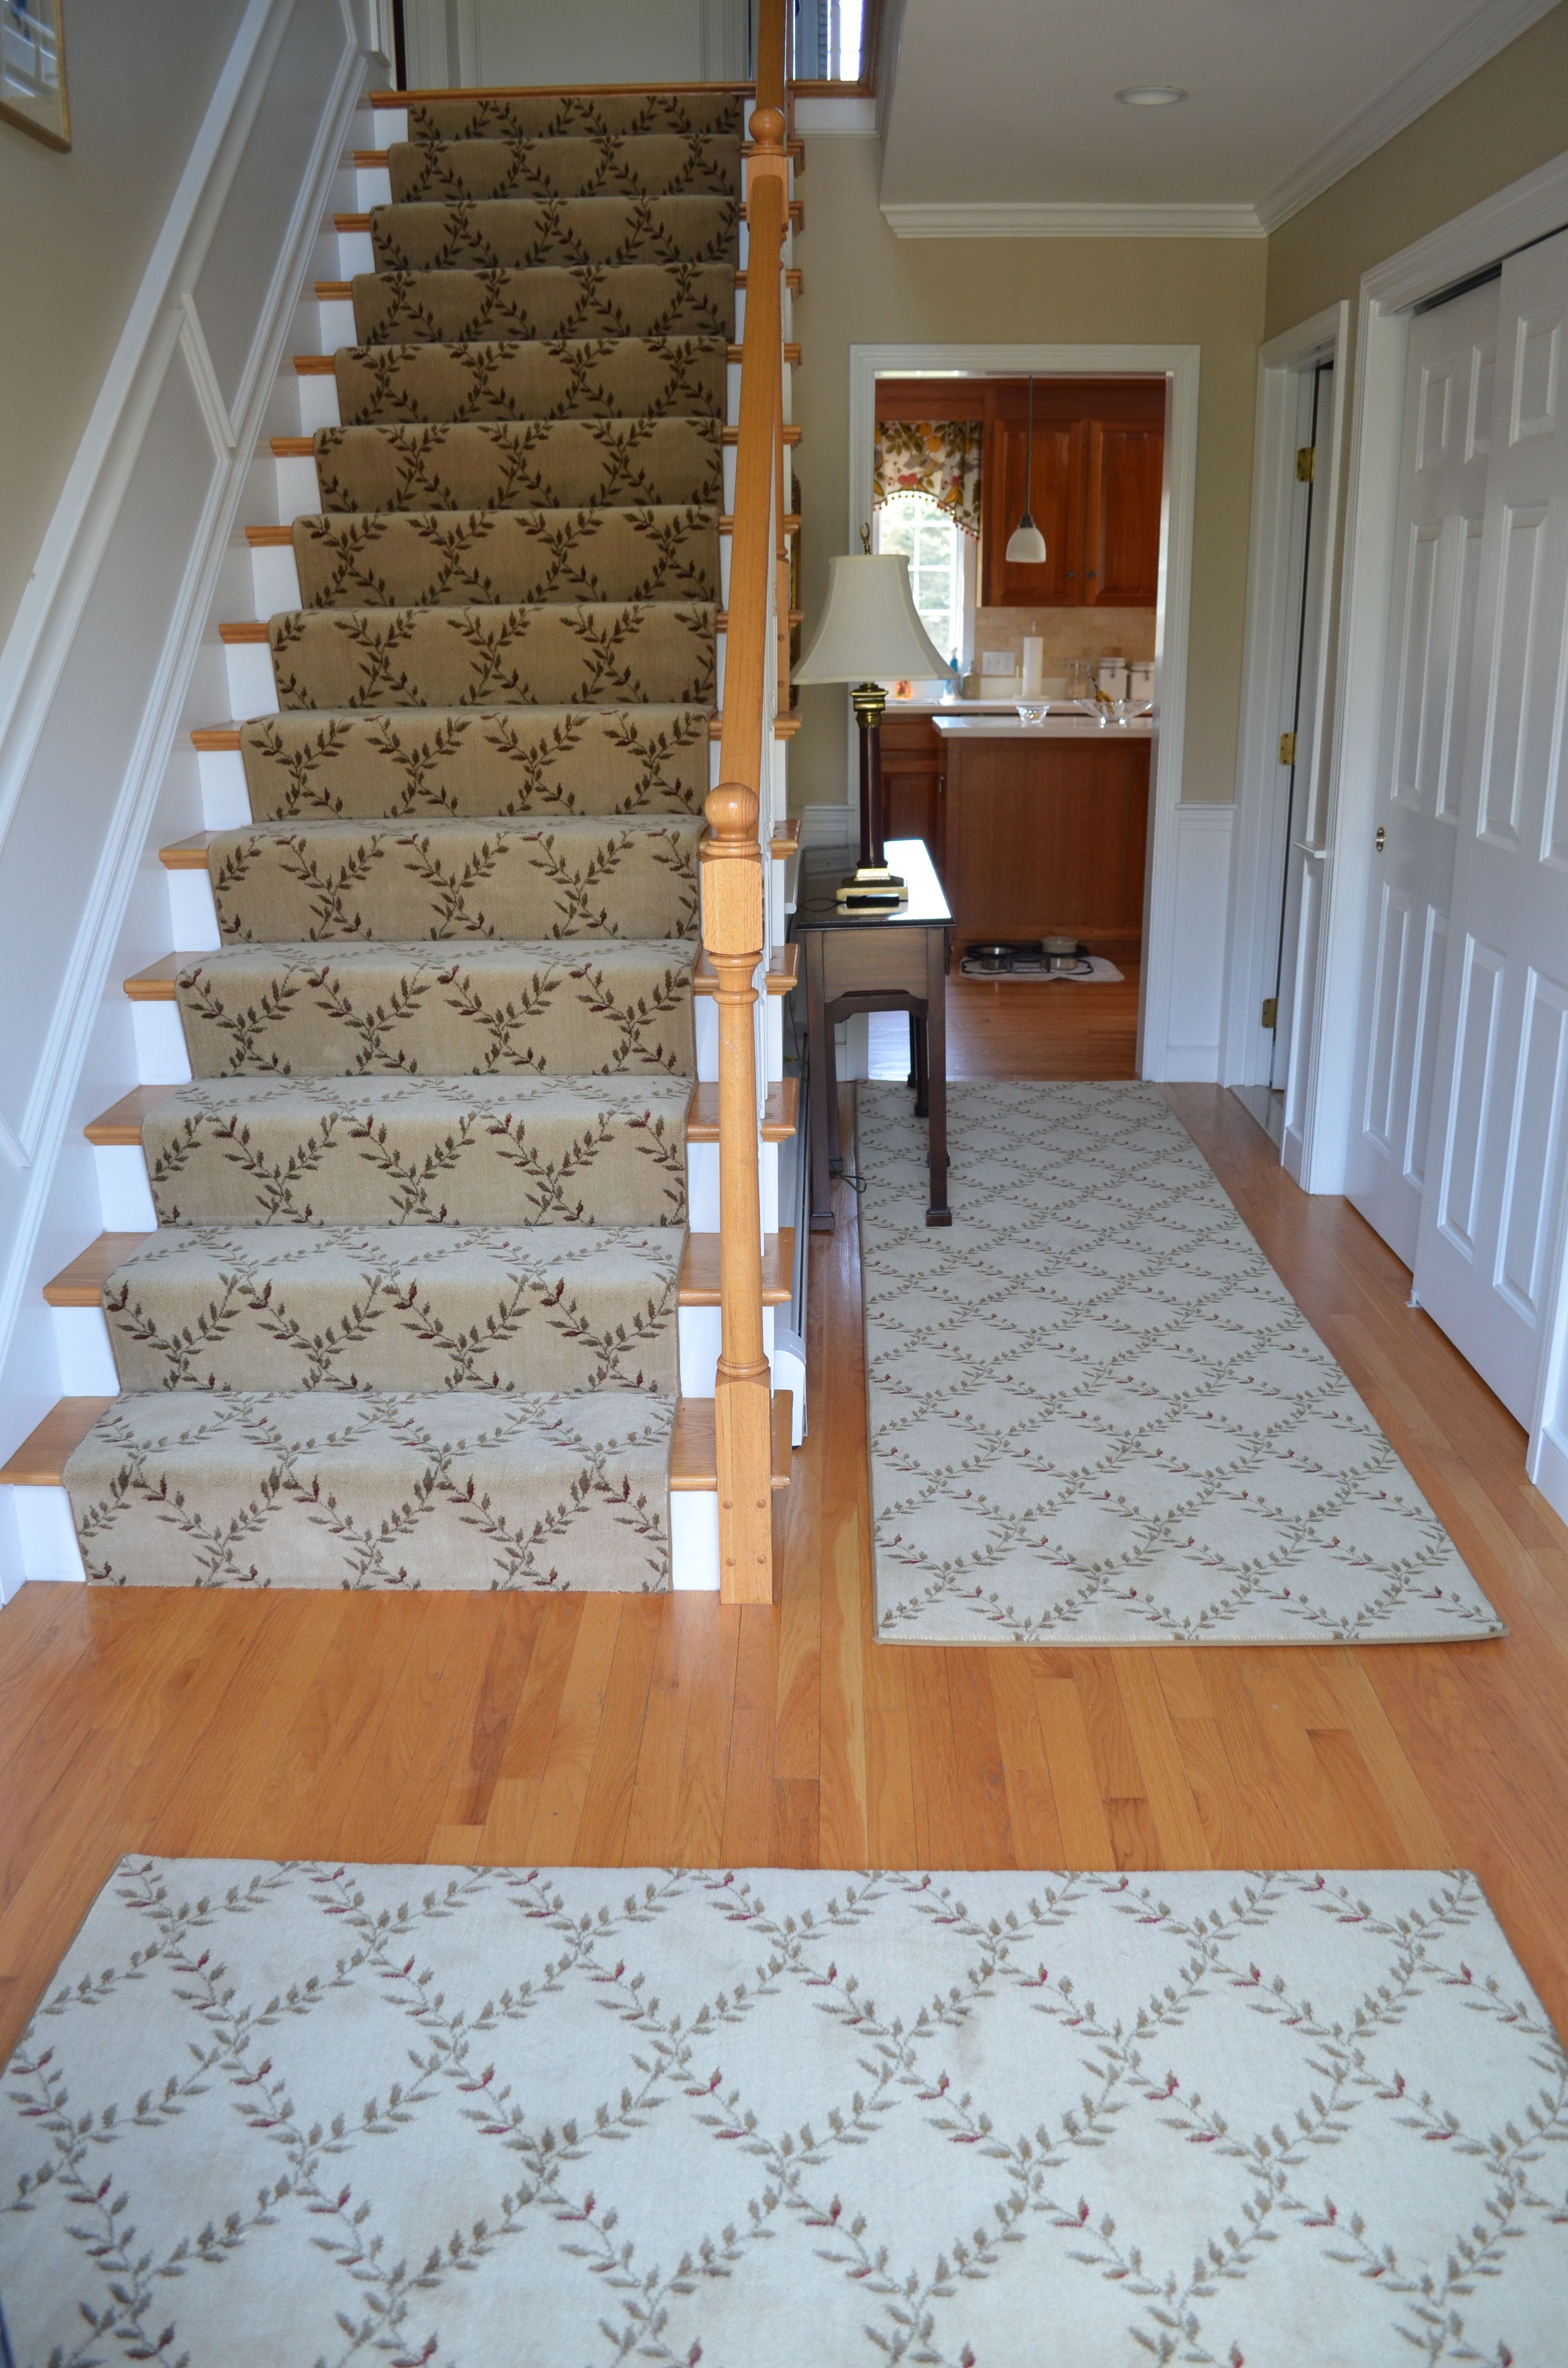 Rug Carpet Stair Treads Lowes Rubber Stair Treads Stair Tread Inside Stair Tread Carpet Runners 